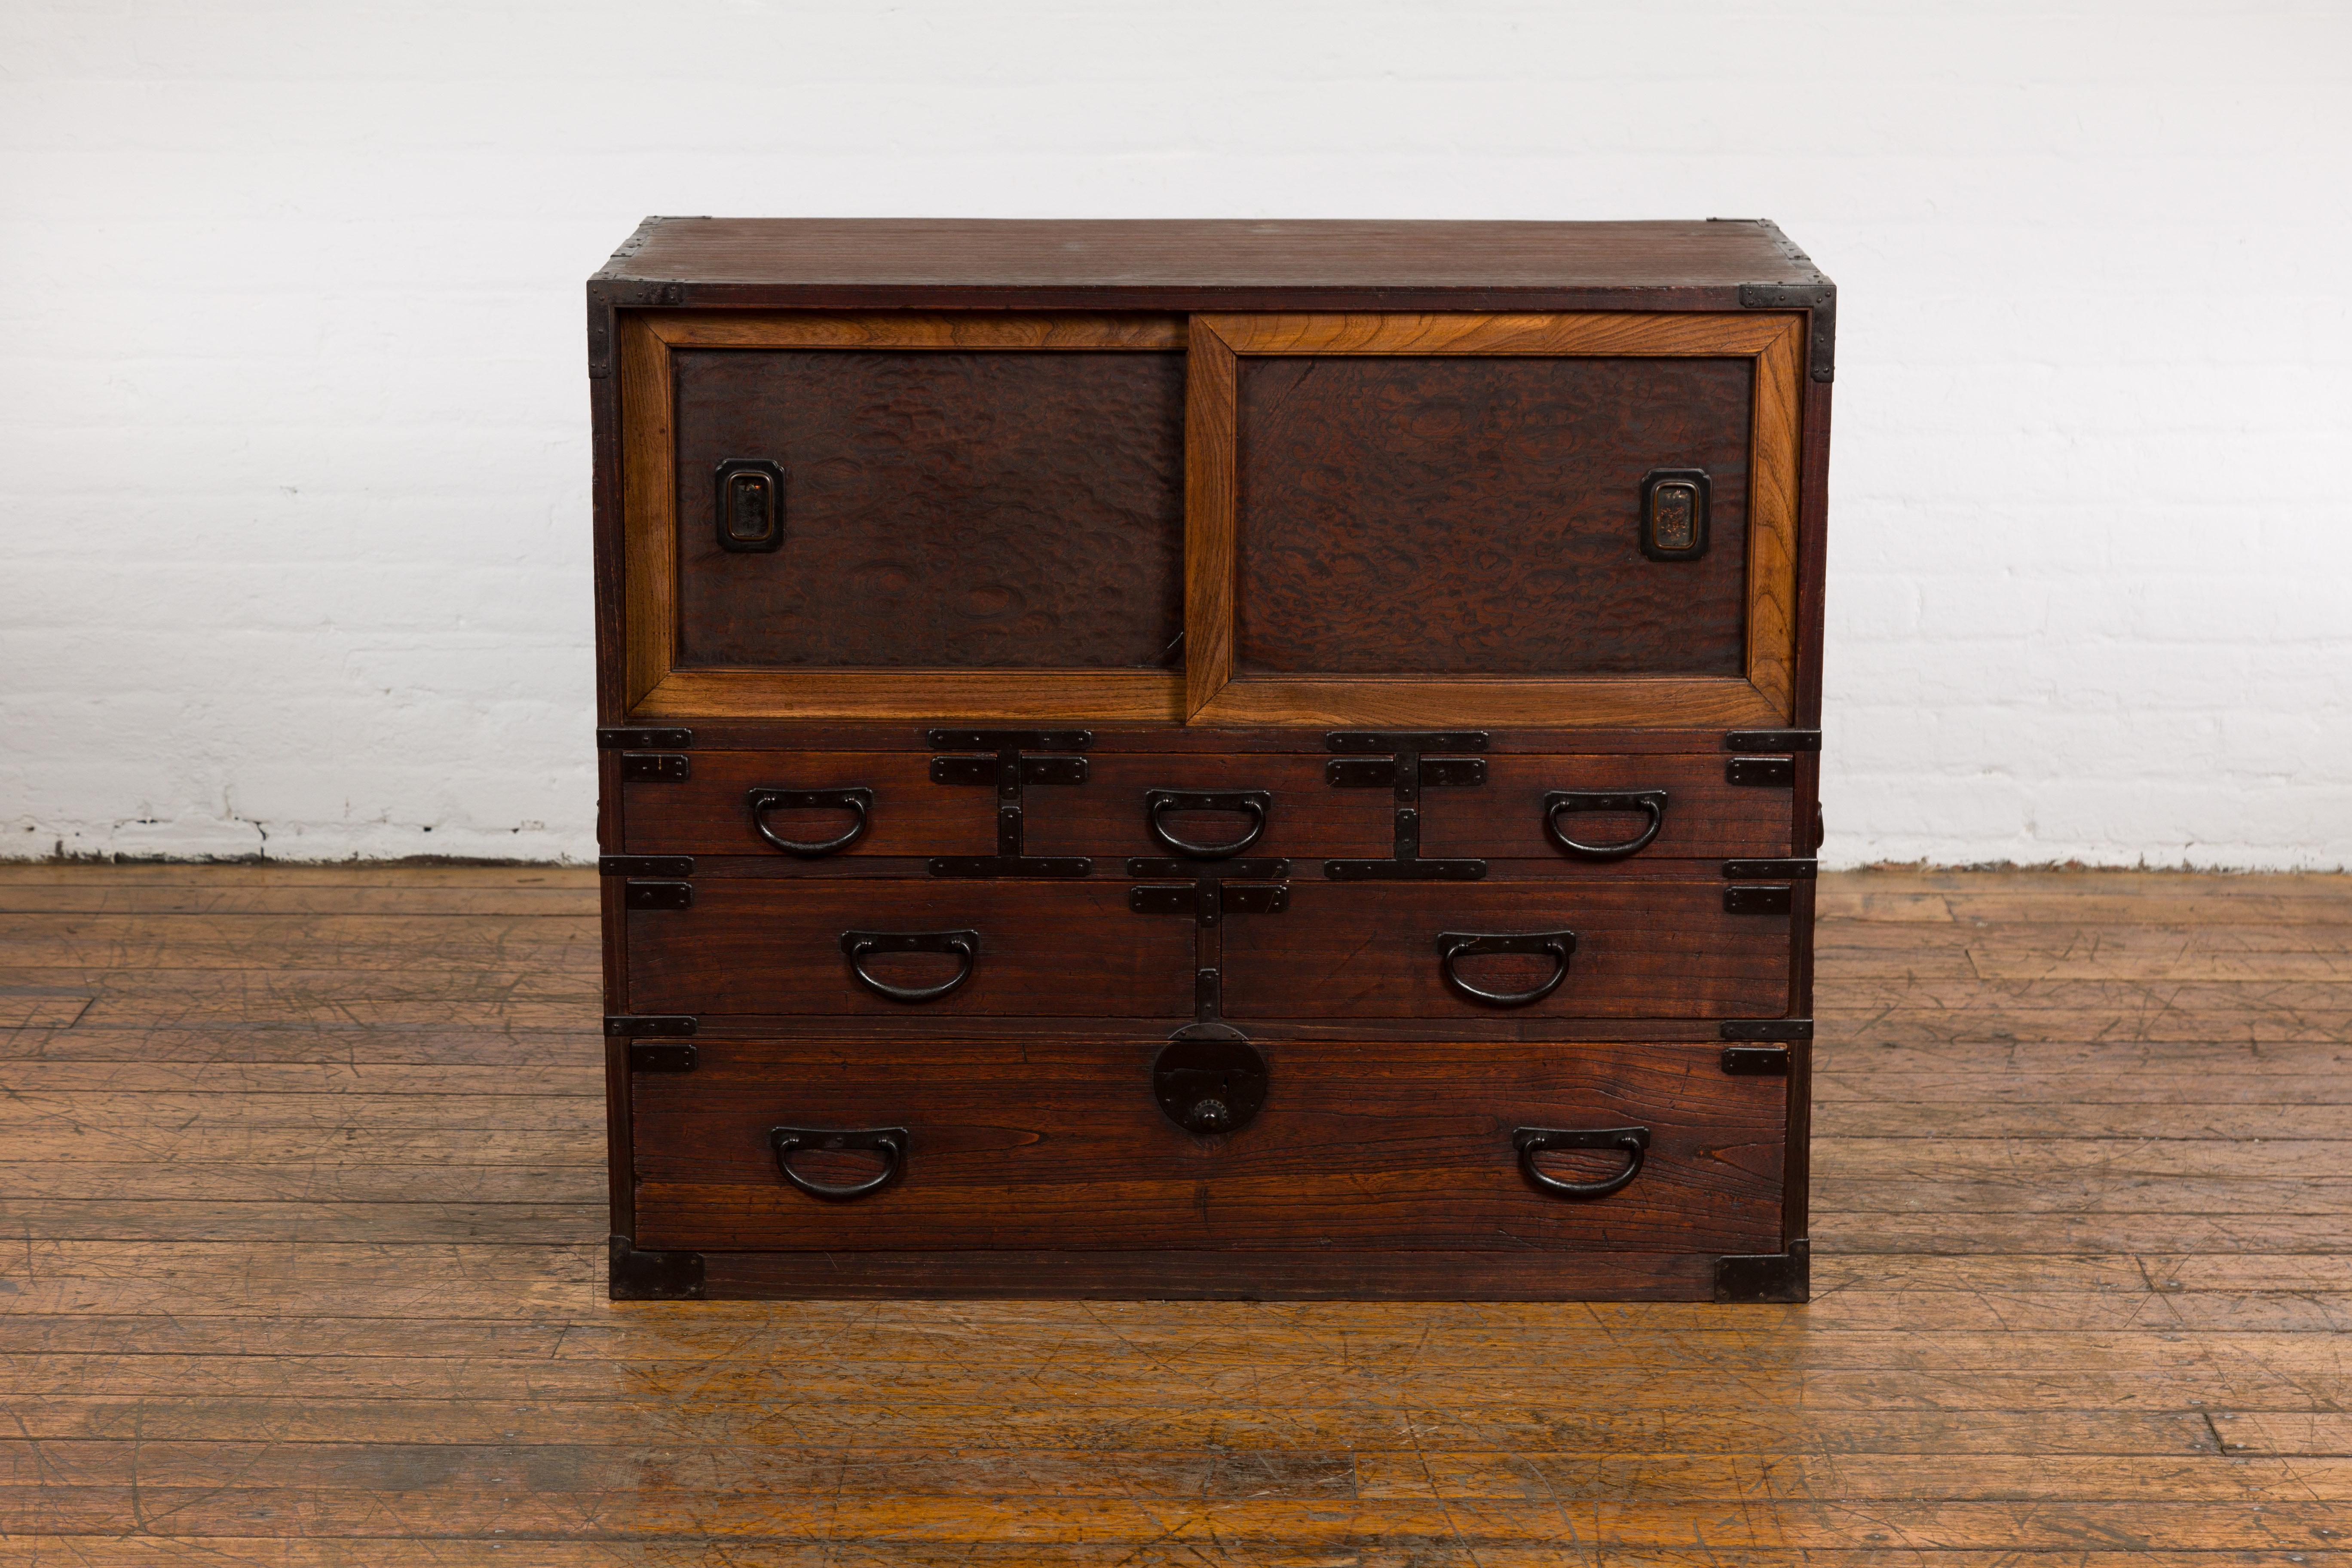 Japanese Meiji period Tansu clothing chest from the 19th century with two sliding doors, six drawers, iron hardware and custom finish. A captivating blend of tradition and artistry, this Japanese Meiji period Tansu clothing chest from the 19th